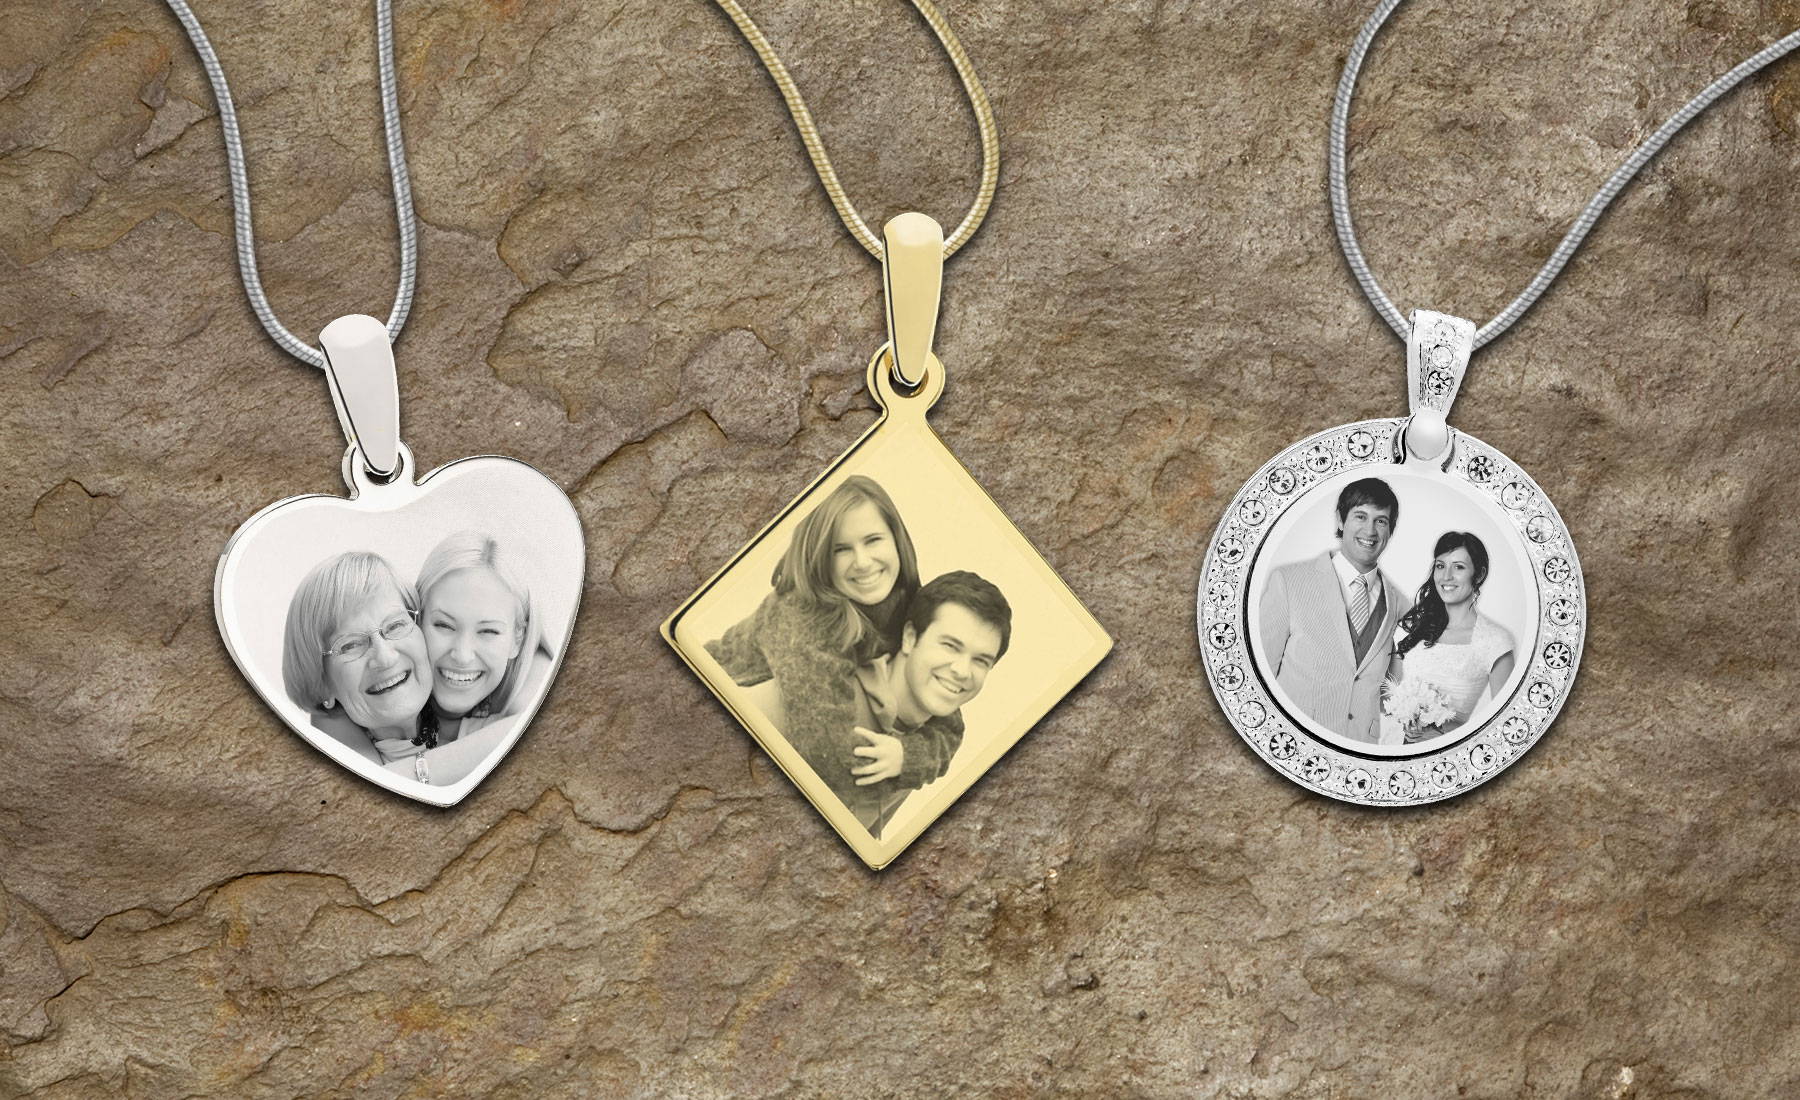 PHOTO ENGRAVED Pendant Unique Gift your image and text permanently engraved 